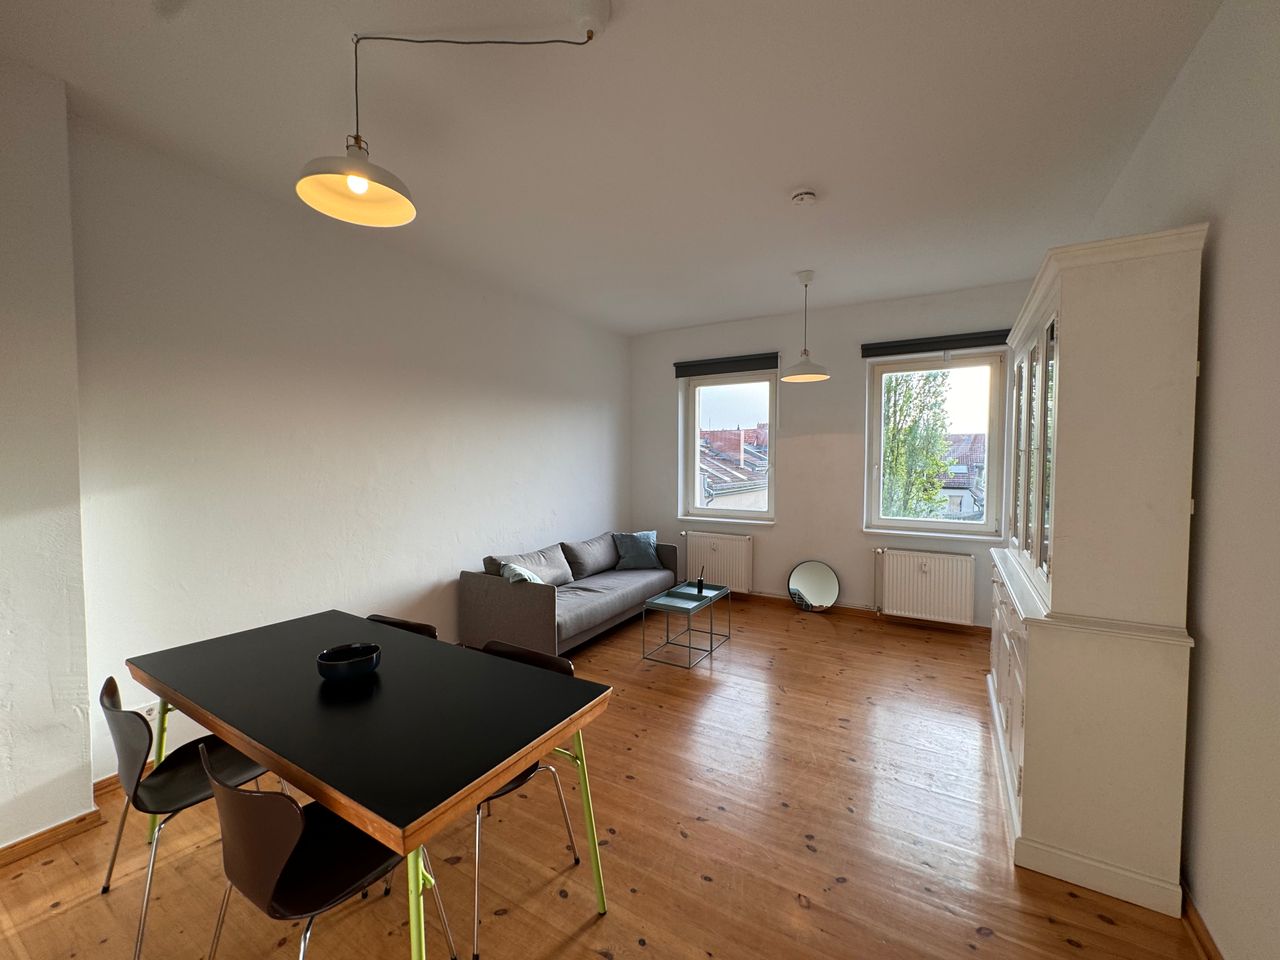 Amazing flat in Berlin Mitte with a beautiful view over the rooftops